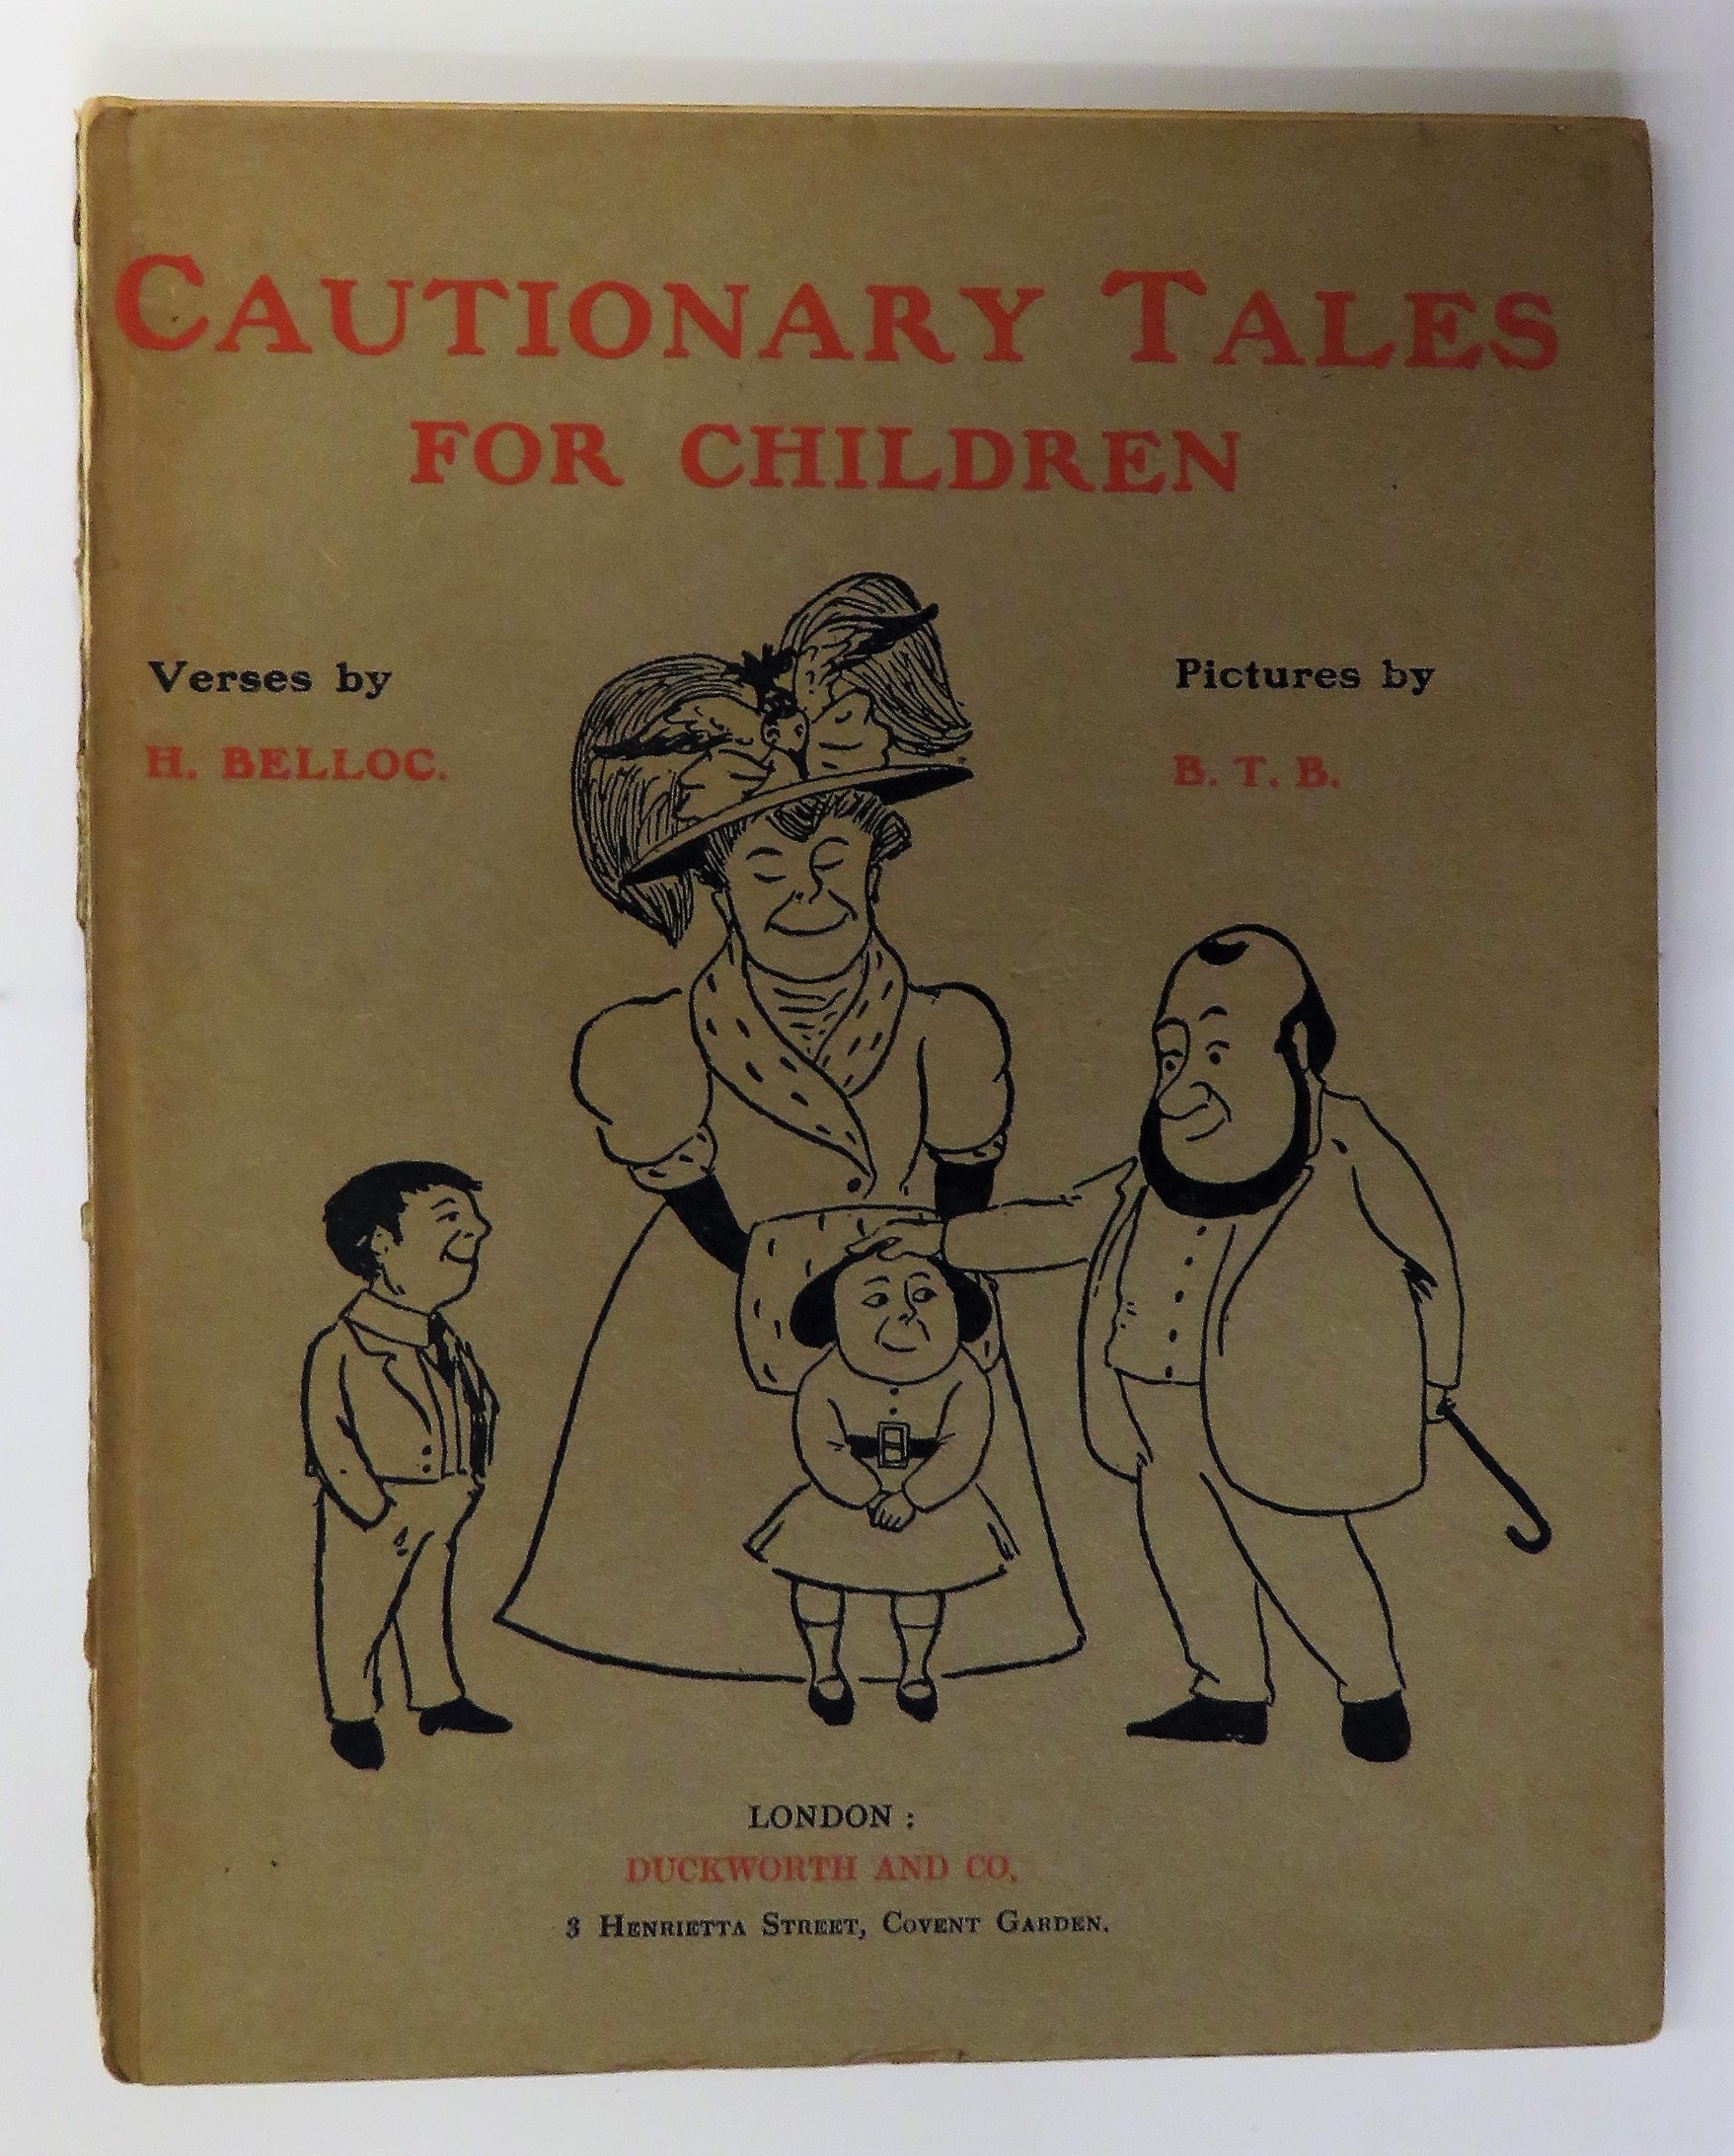 Cautionary Tales for Children Designed for the Admonition of Children between the ages of eight and fourteen years.